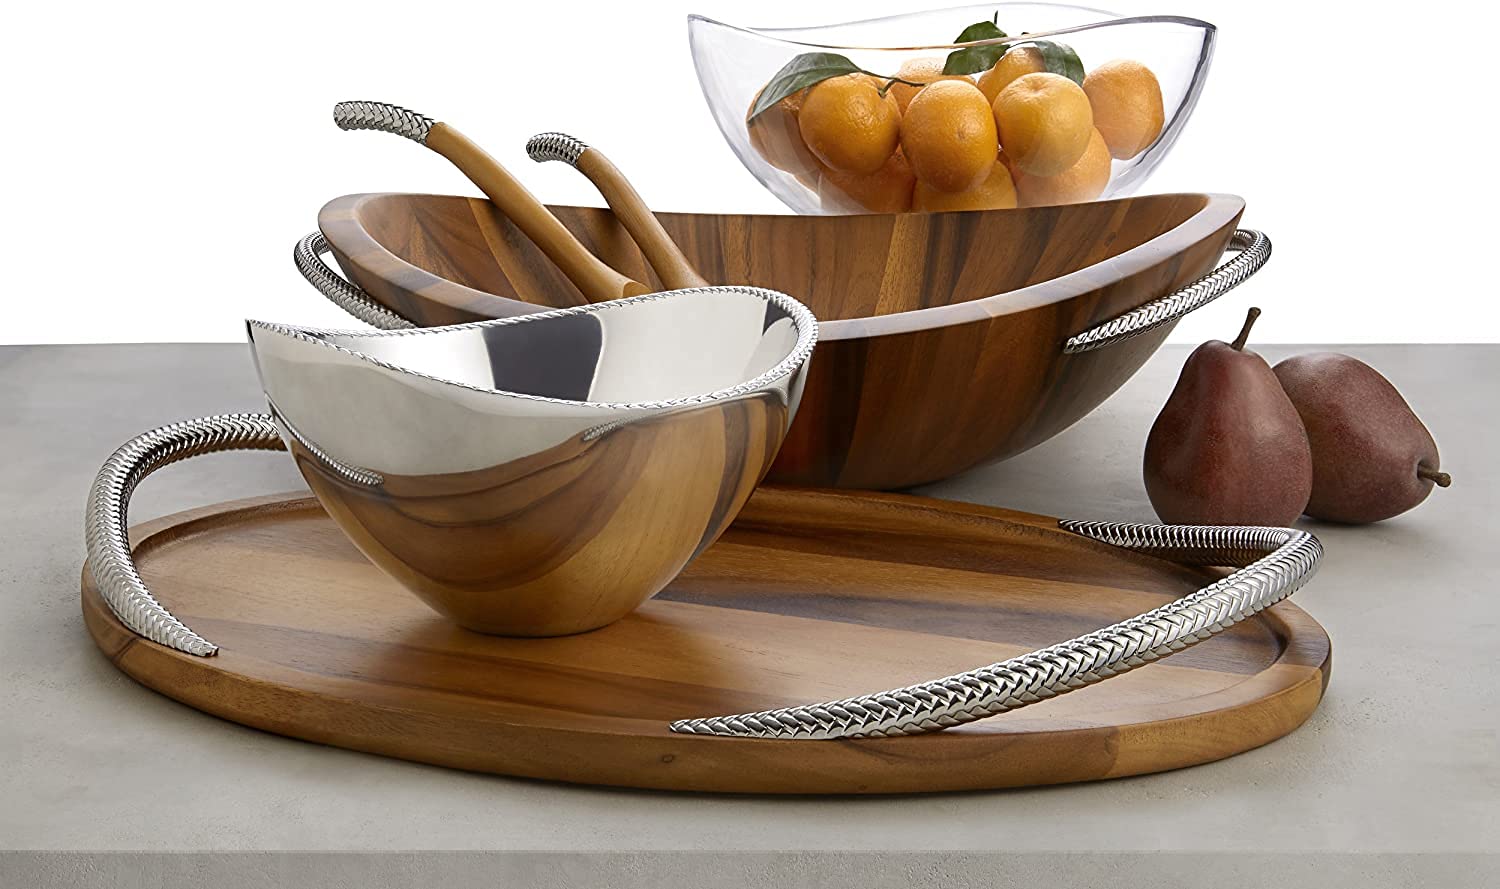 Nambe - Pulse Collection - Bread & Fruit Bowl - Measures at 16.25" x 8.5" x 5.5" - Made with Acacia Wood and Stainless Steel - Designed by Sena & Seidenfaden Design